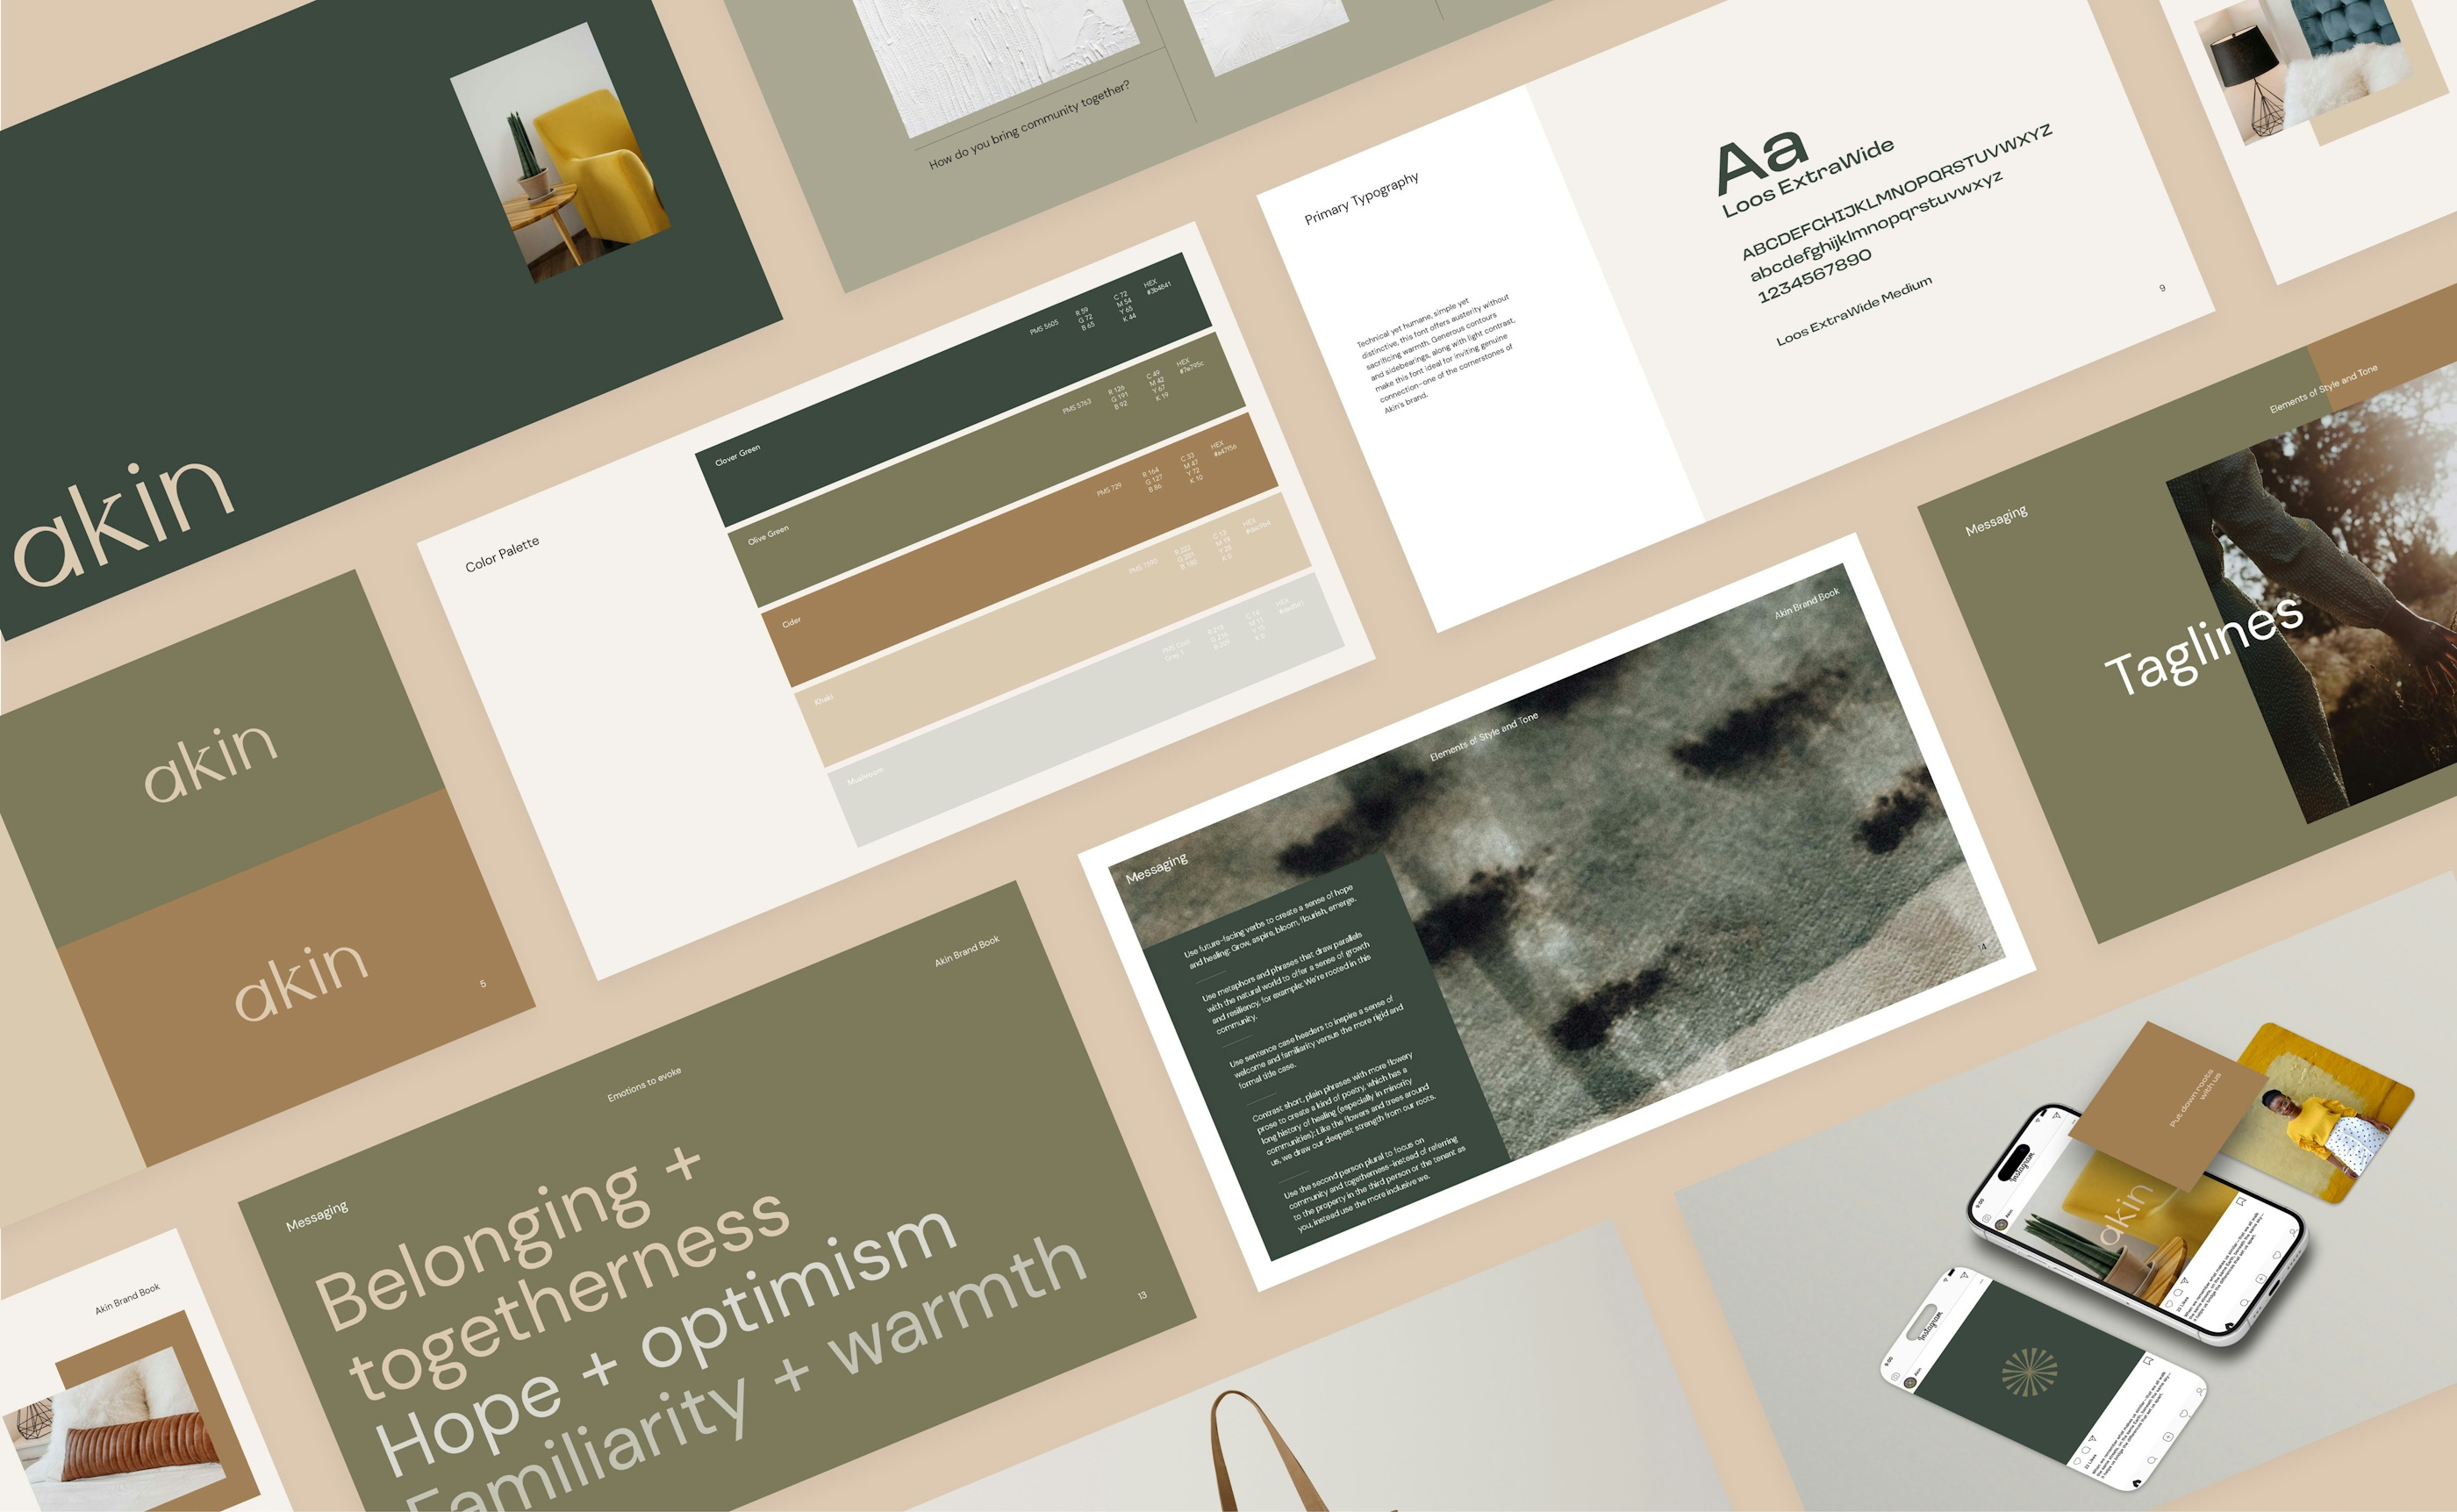 Akin brand guidelines 2